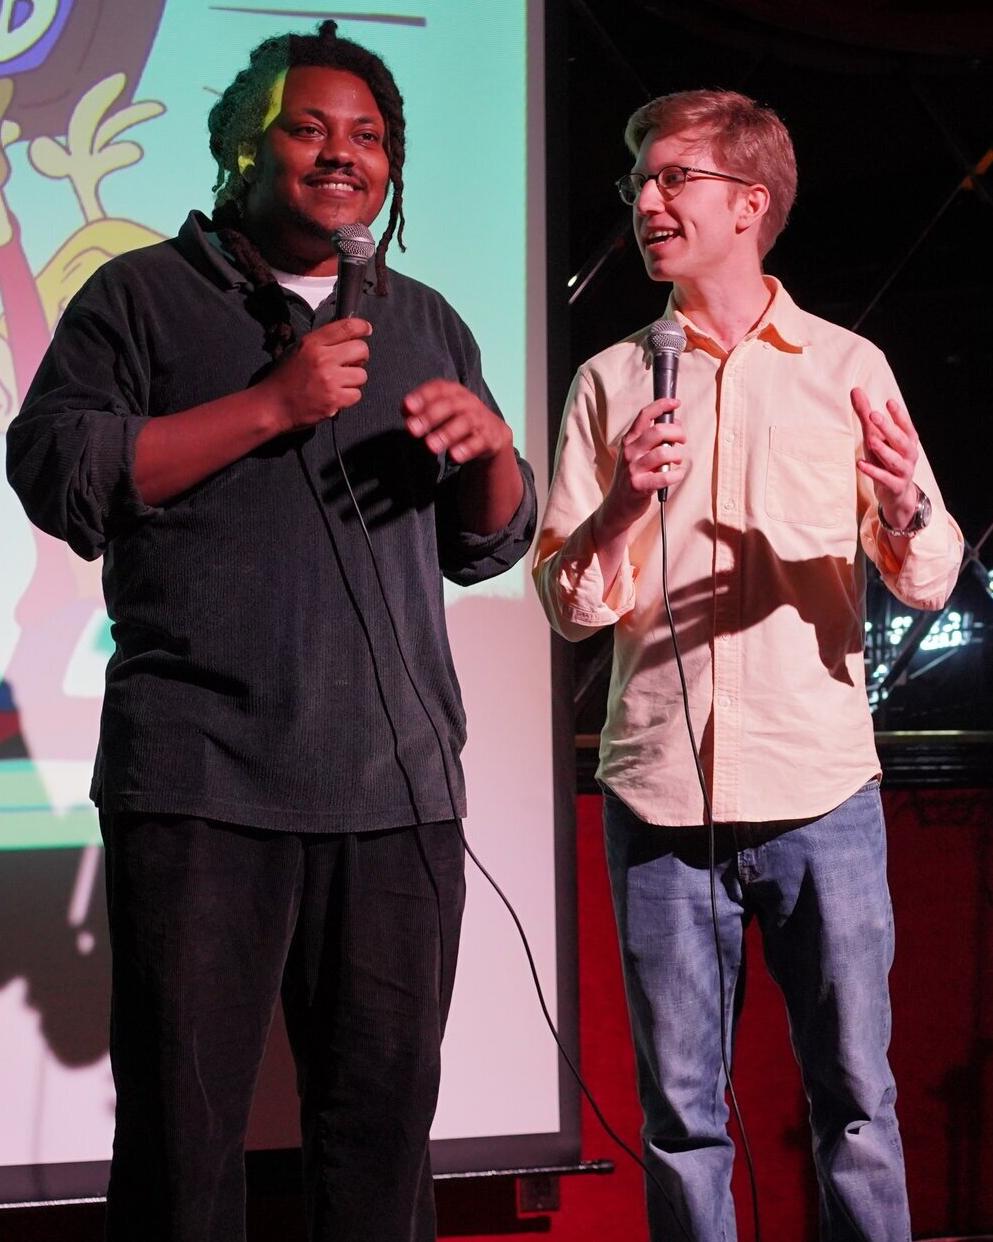 Two comedians, one black and one white, holding microphones, smiling